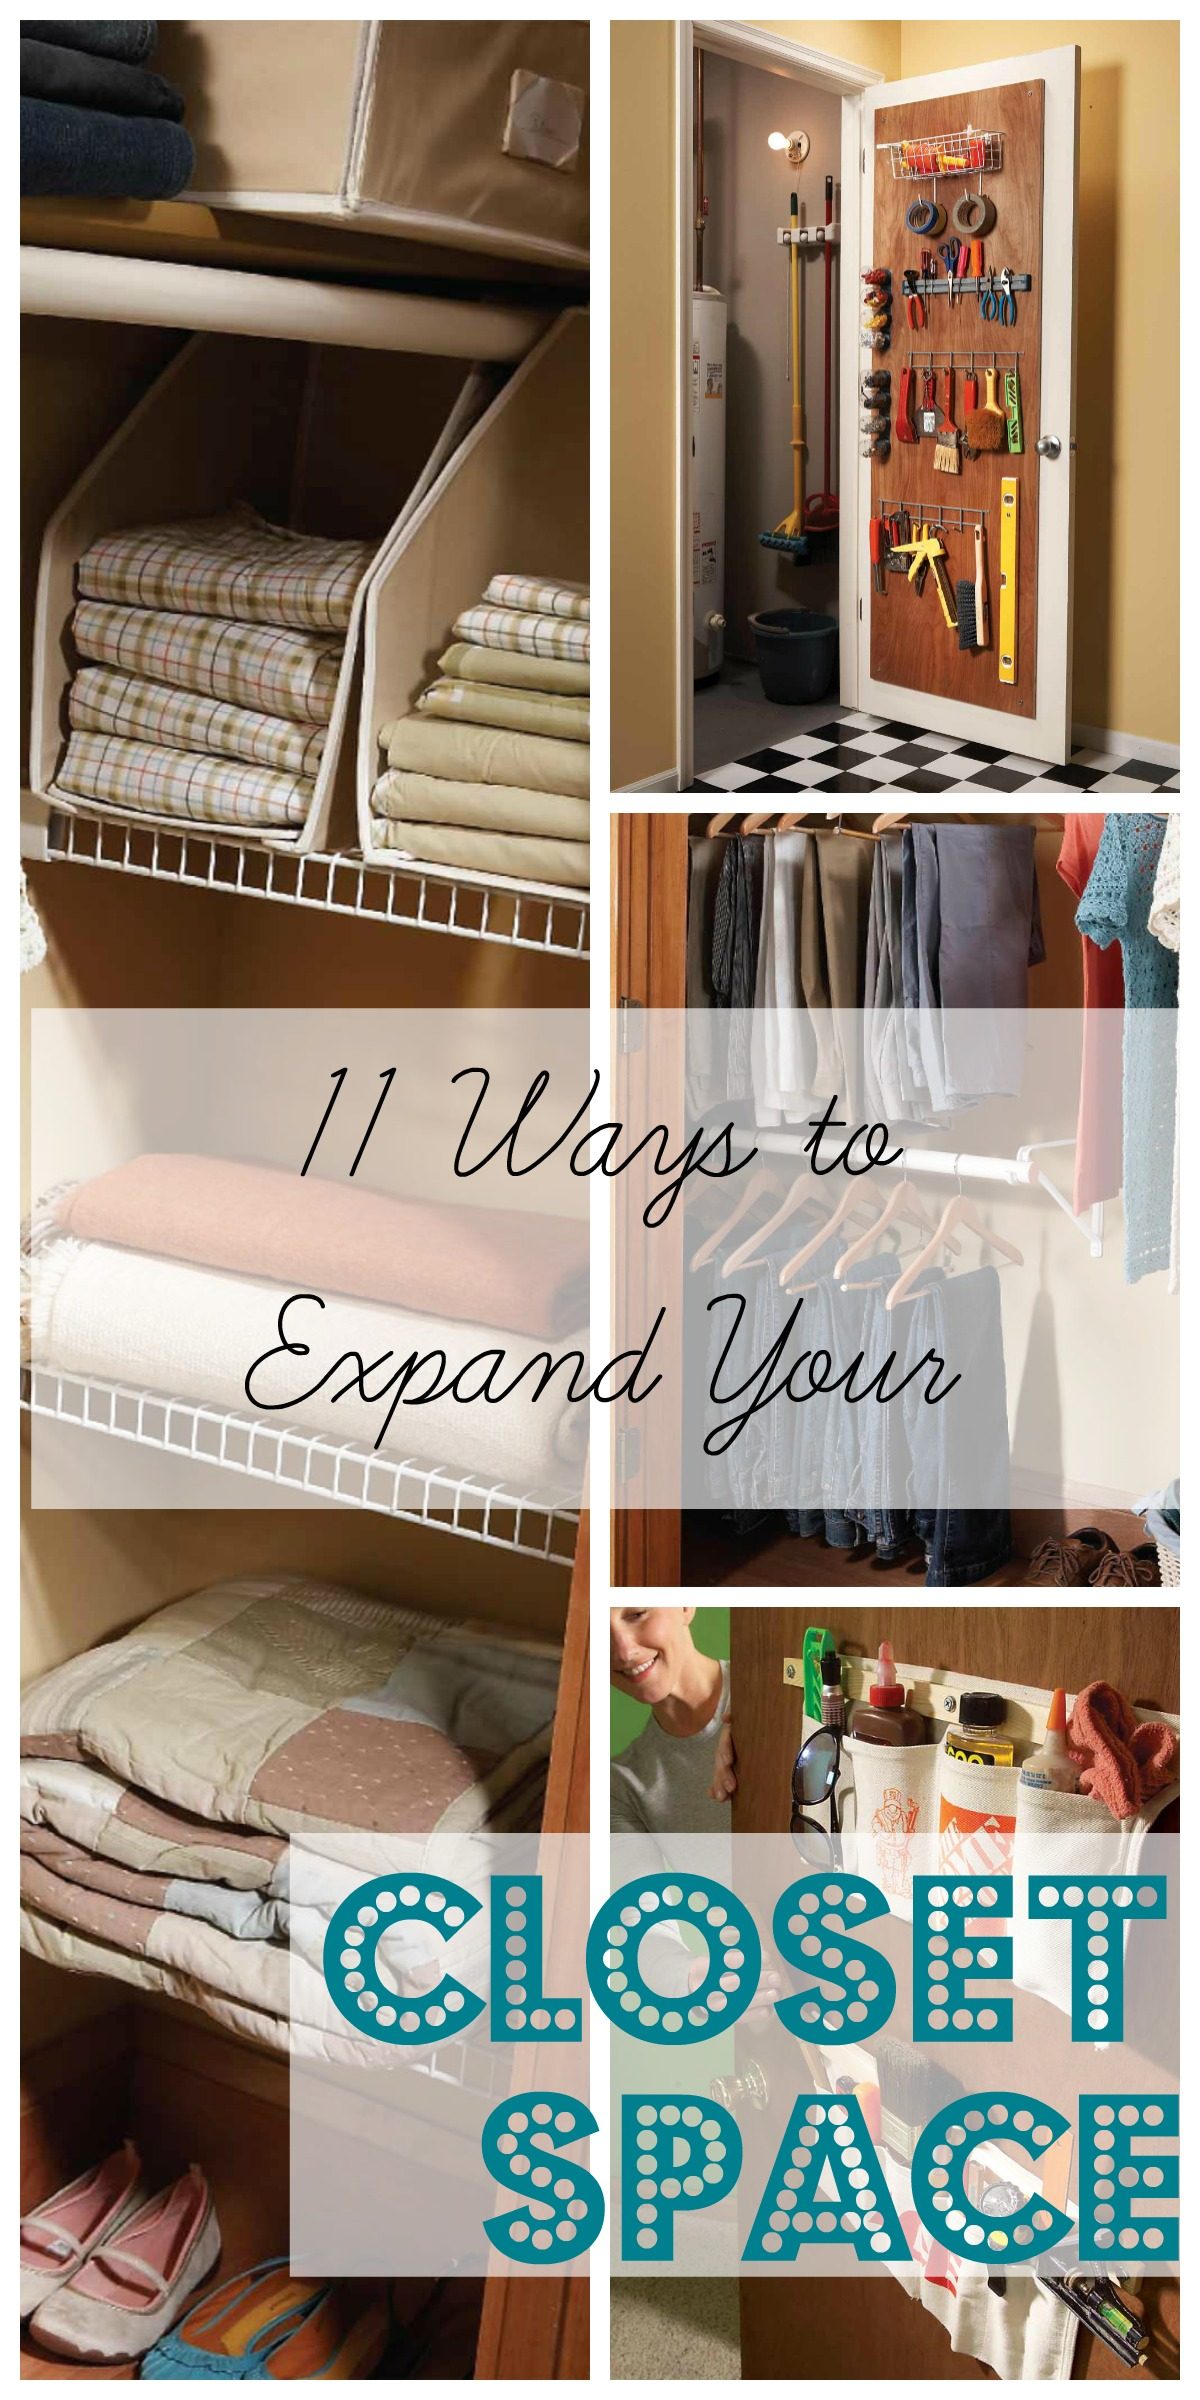 Easy Ways to Expand Your Closet Space The Family Handyman